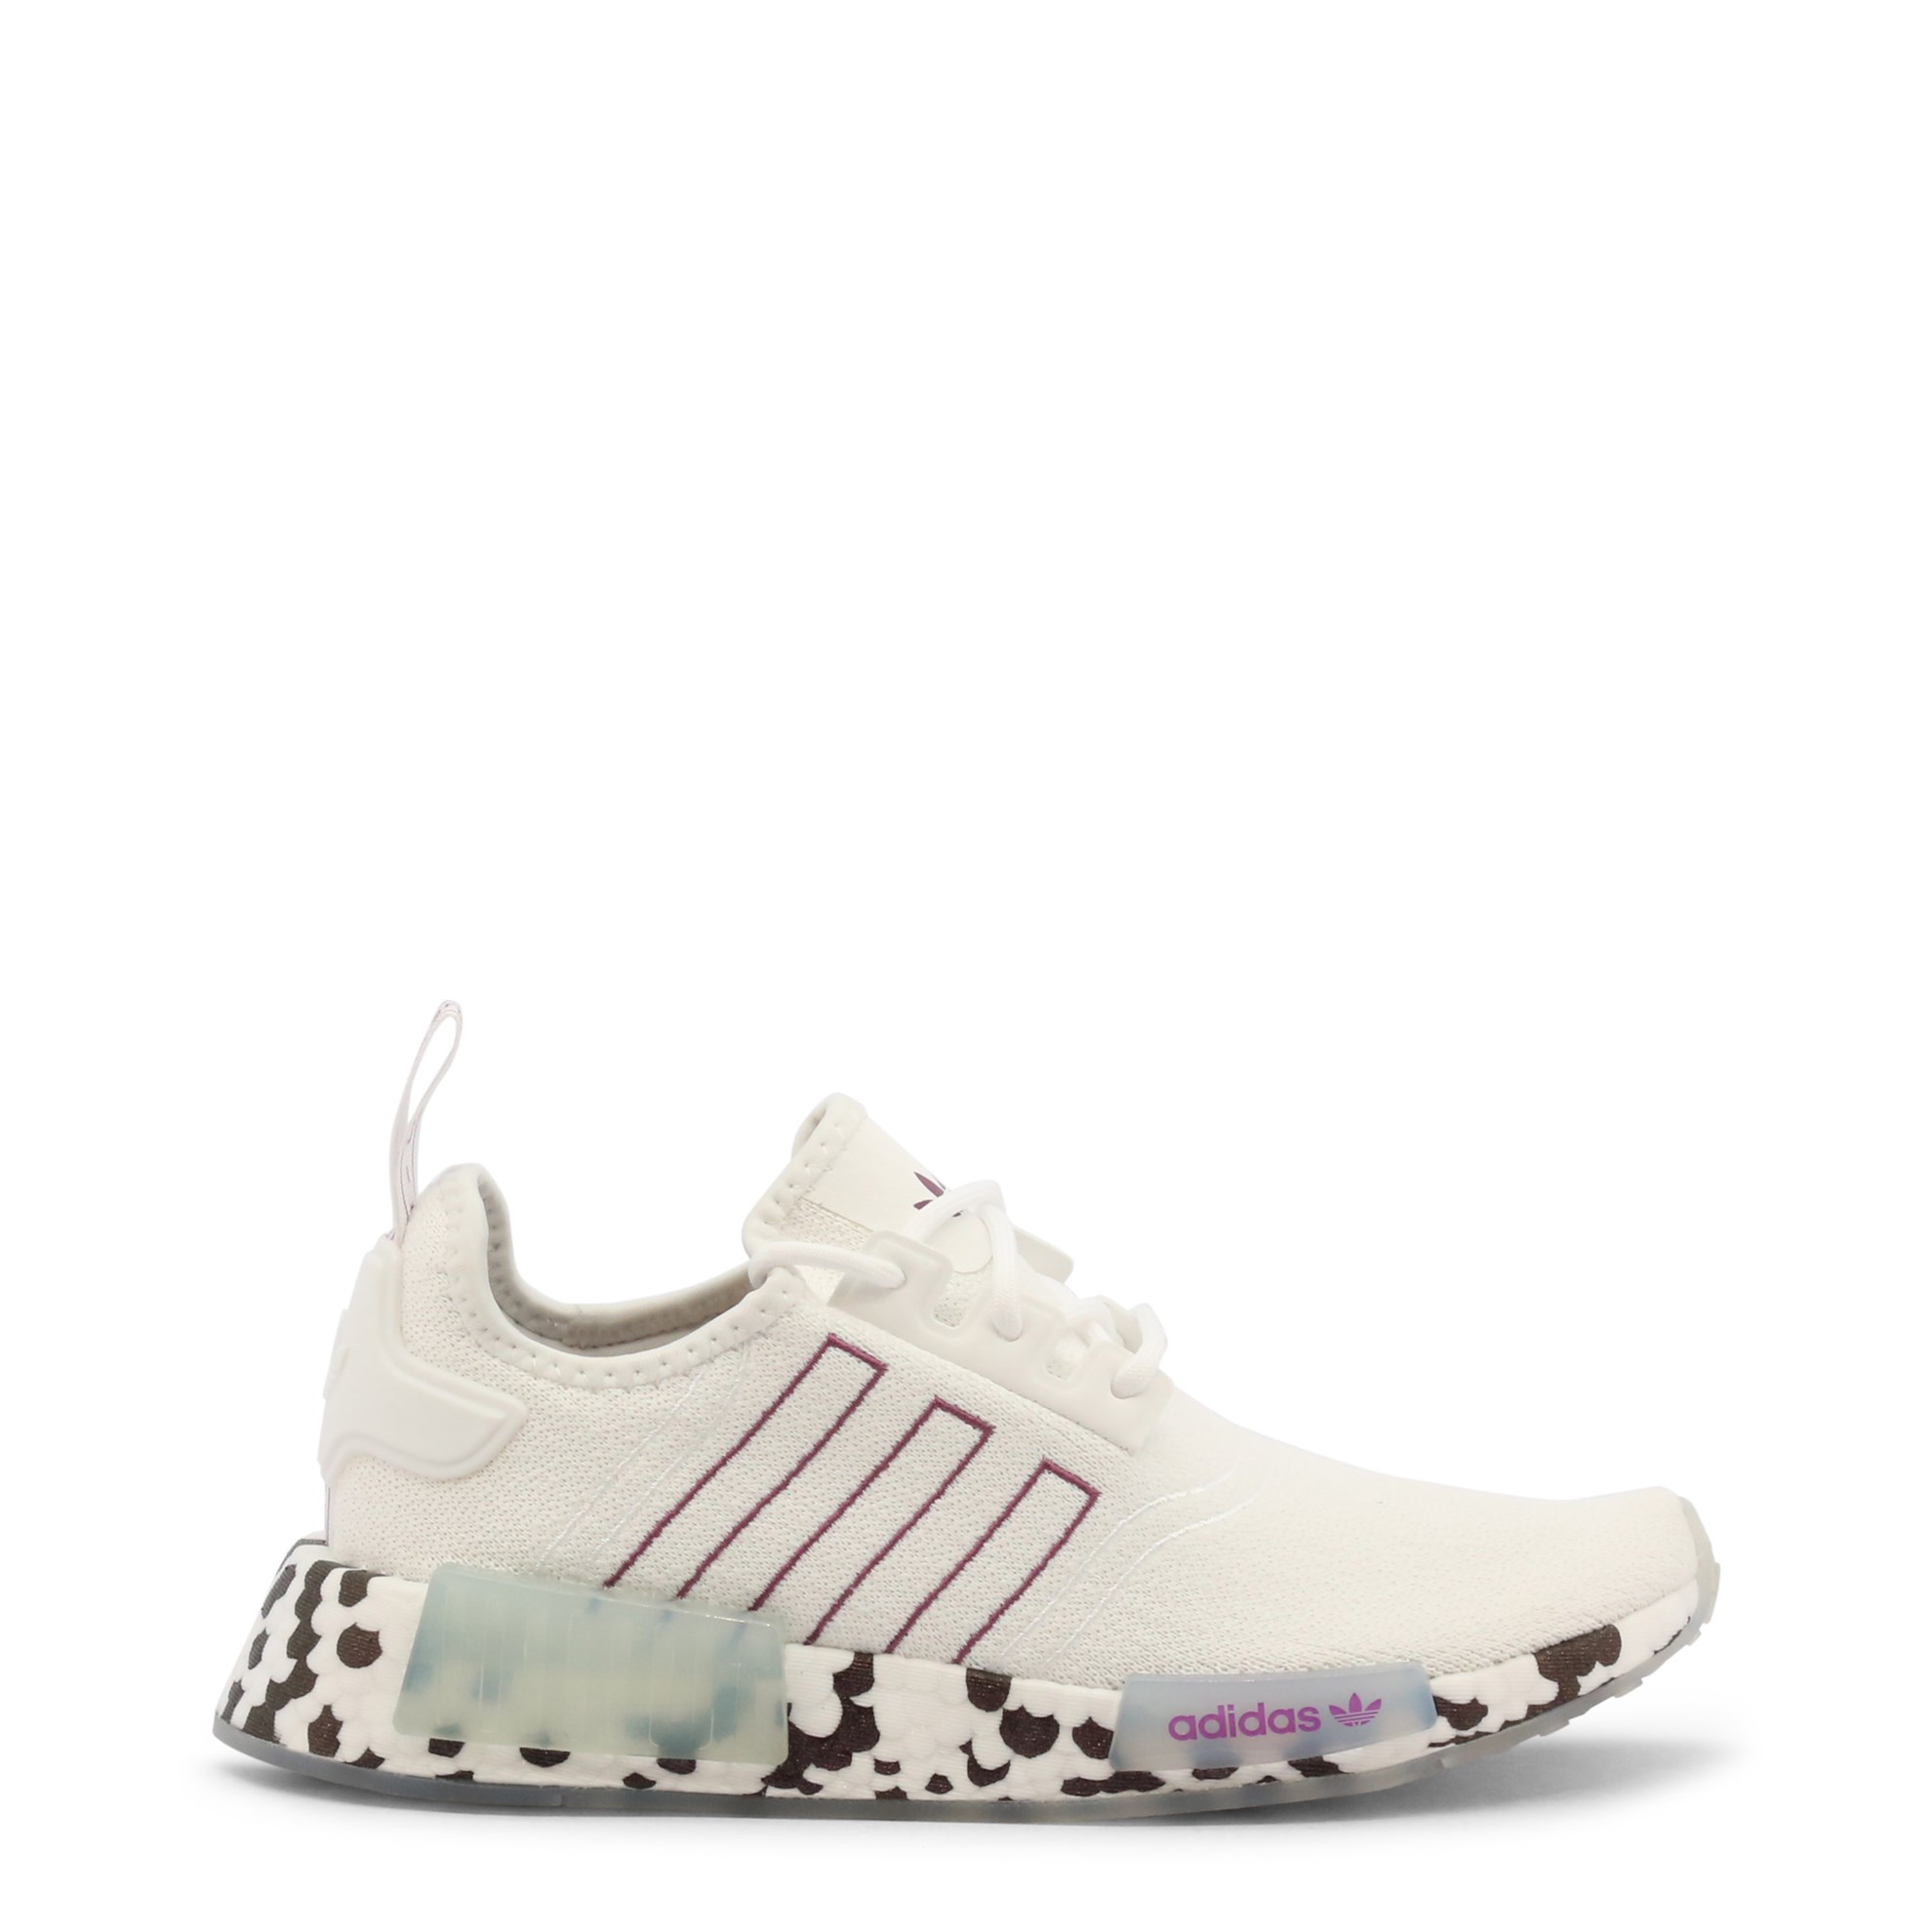 Adidas Women Shoes Nmd R1 White